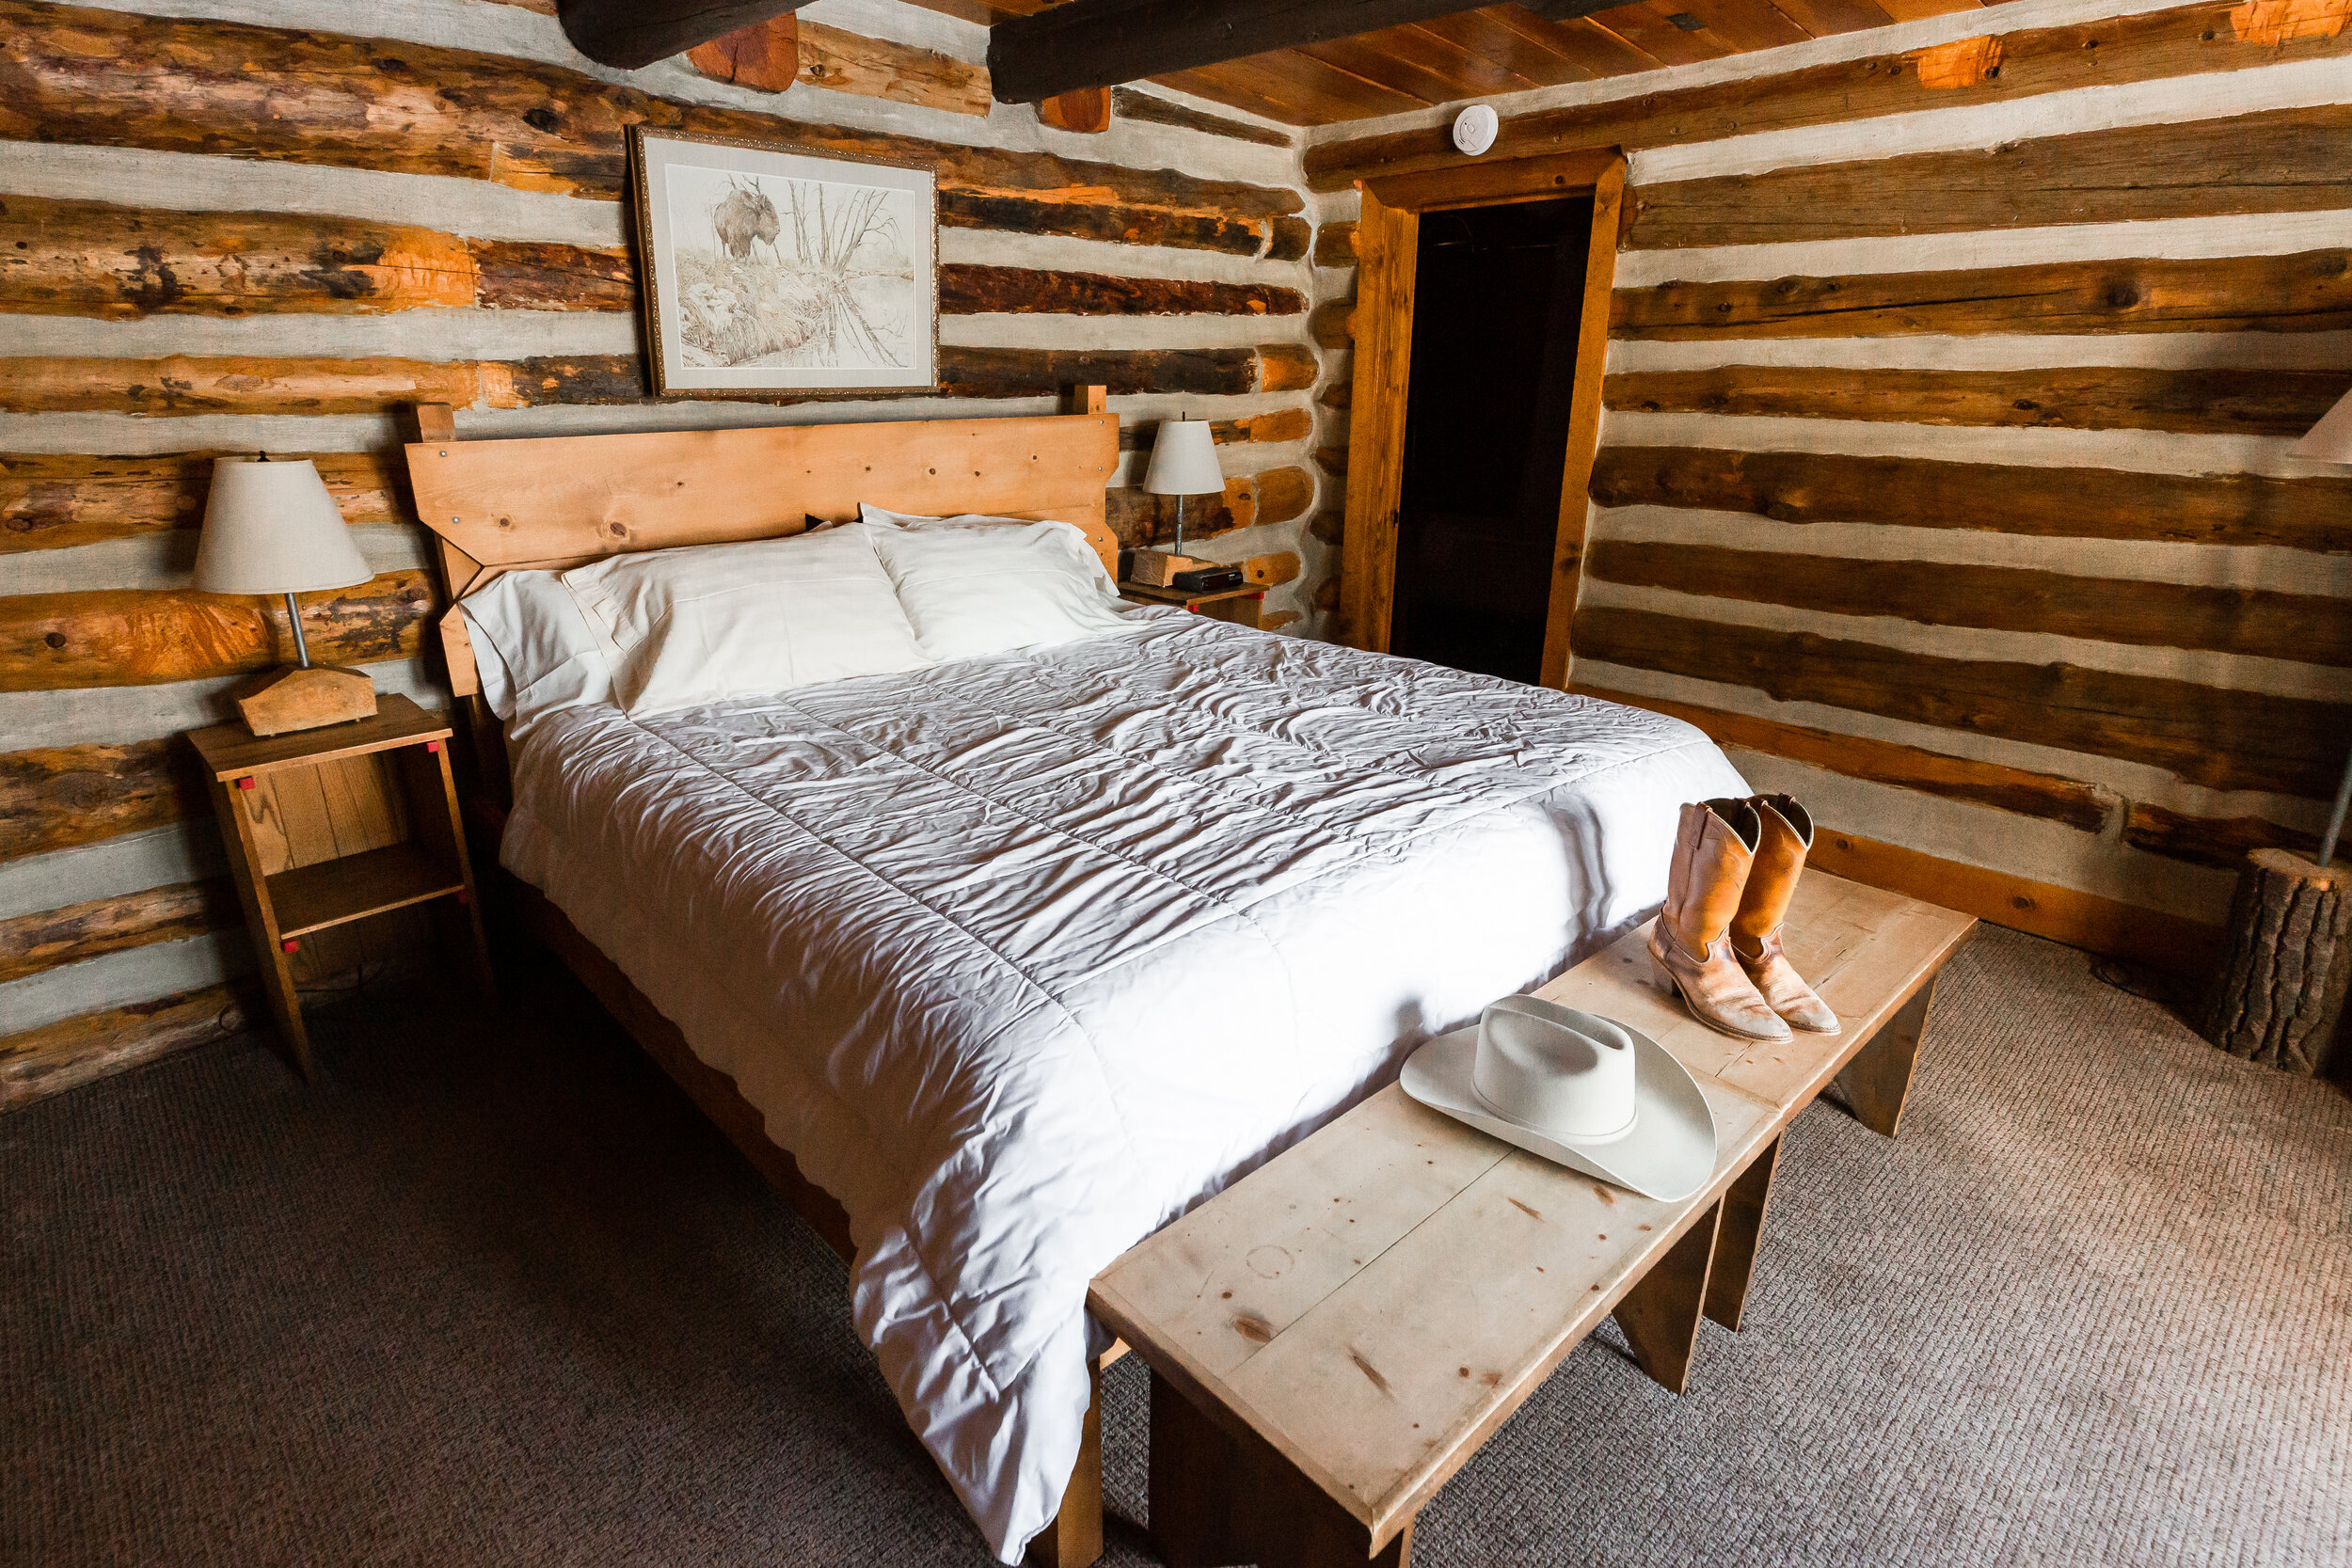   One of the 15 bedrooms at the lodge (photo credit: Ranchlands)  